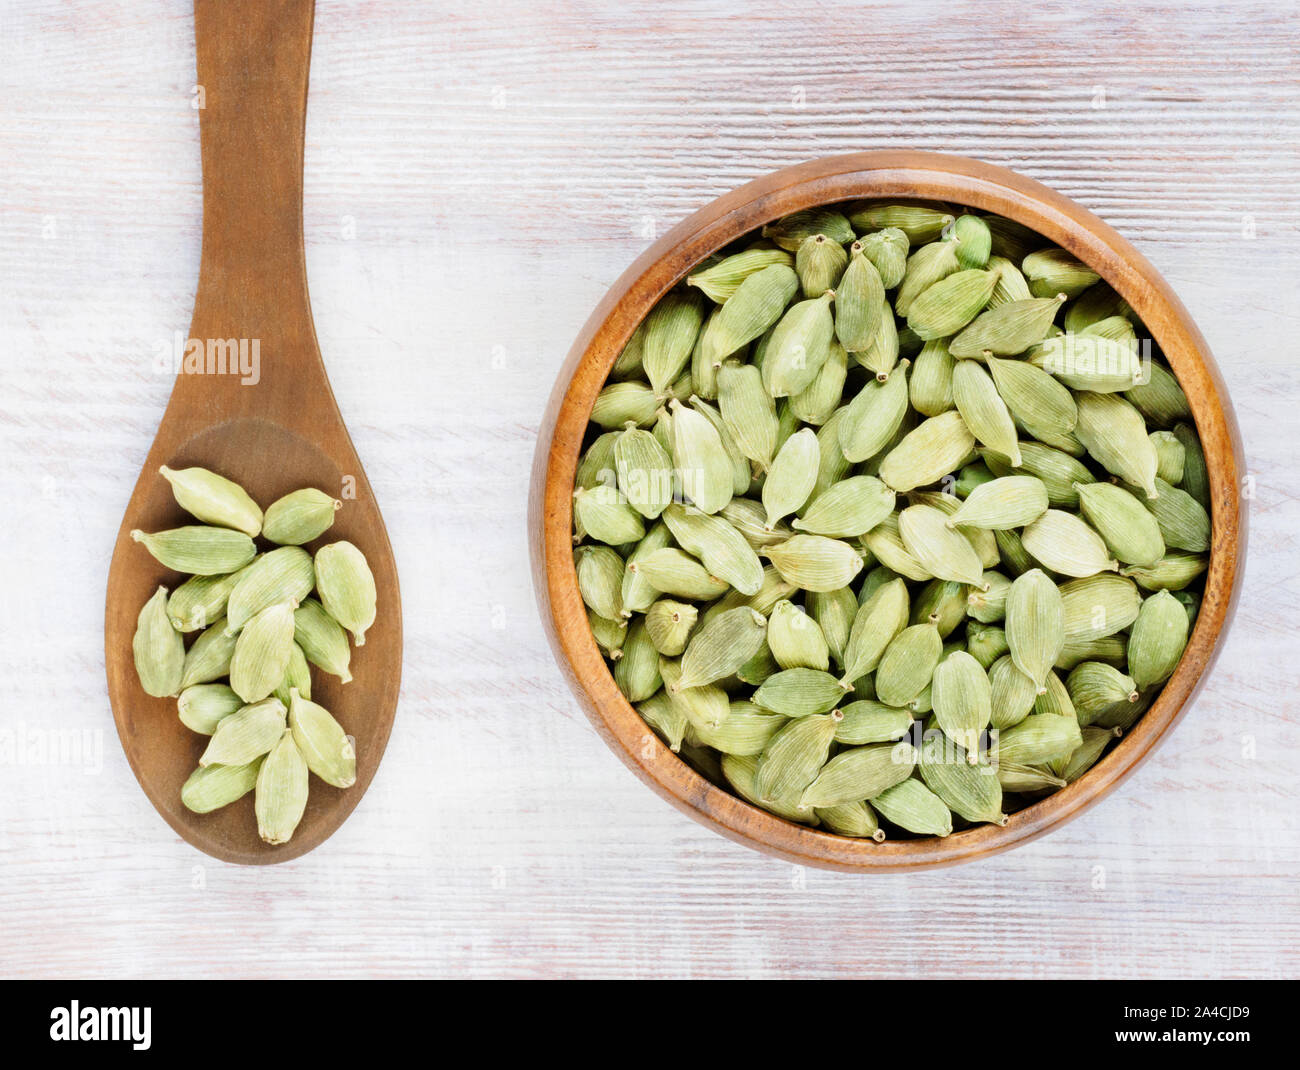 Spice Green cardamom (Elettaria cardamomum) in a wooden cup and spoon on a white wooden background Stock Photo